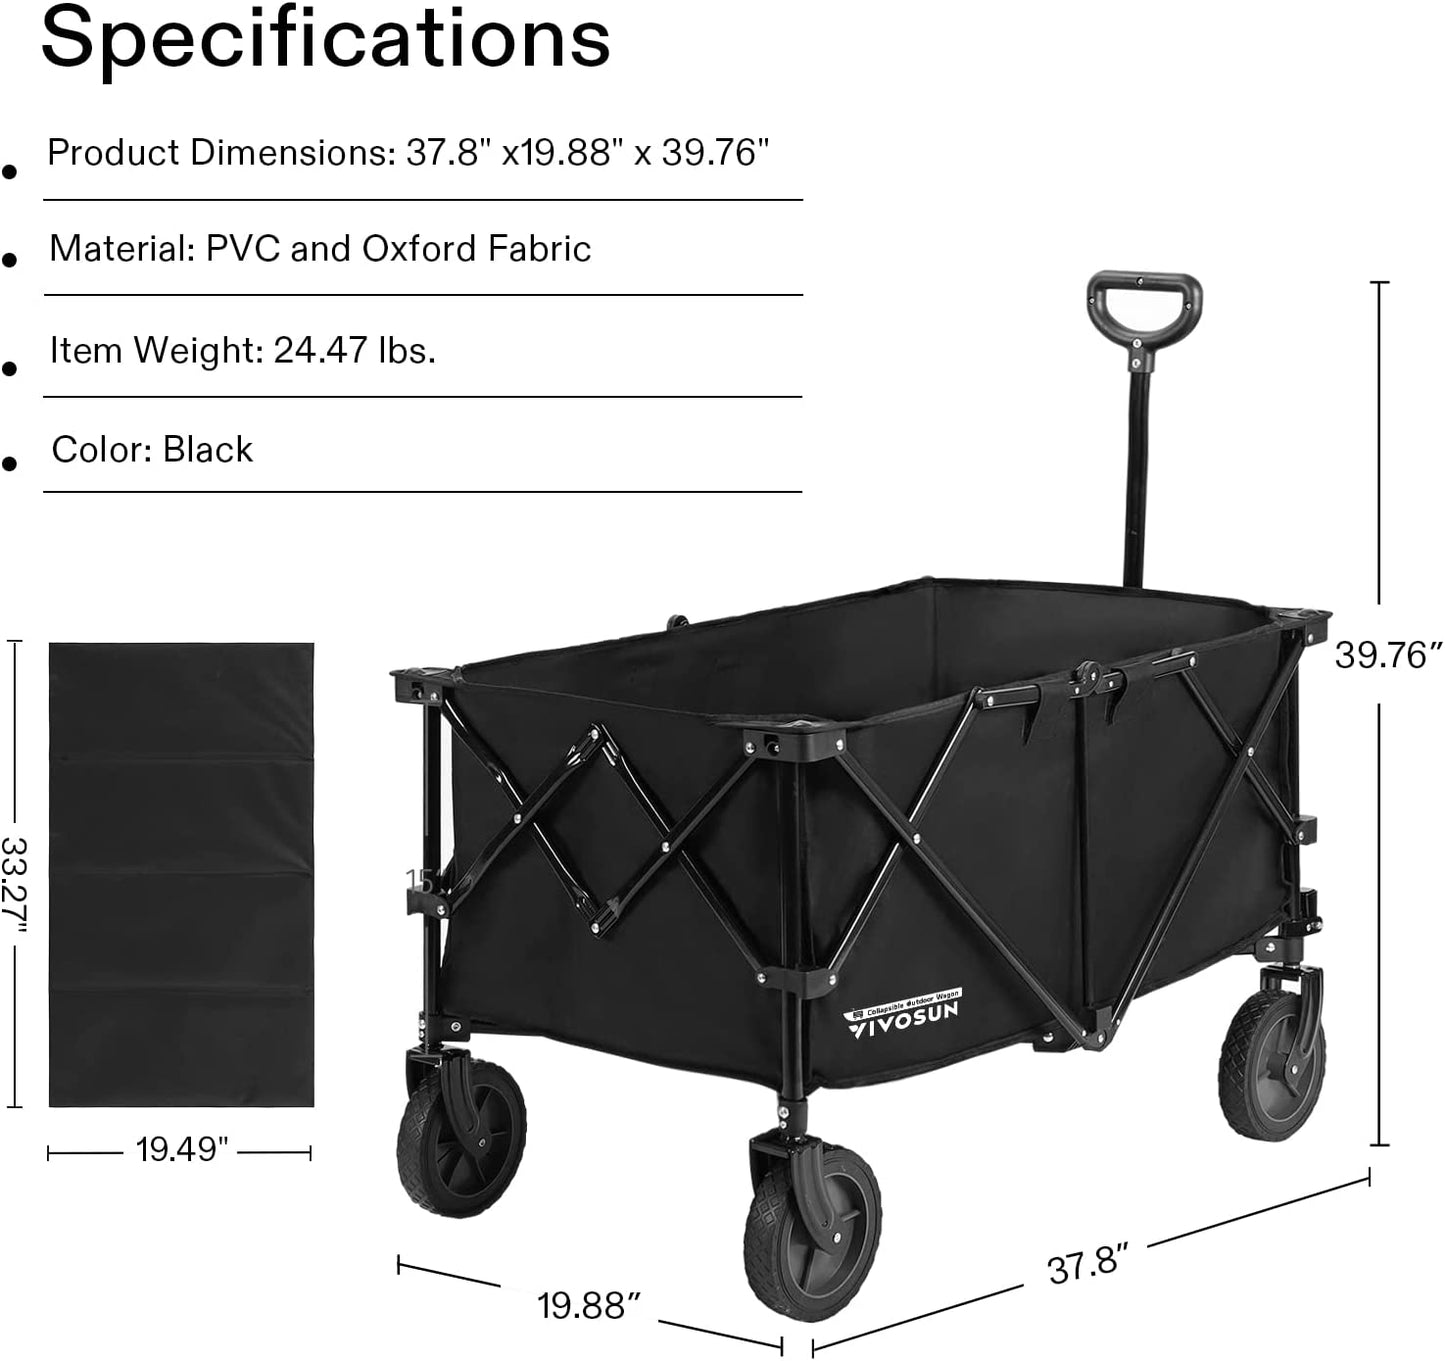 Heavy Duty Collapsible Folding Wagon Utility Outdoor Camping Garden Cart with Universal Wheels & Adjustable Handle, Black